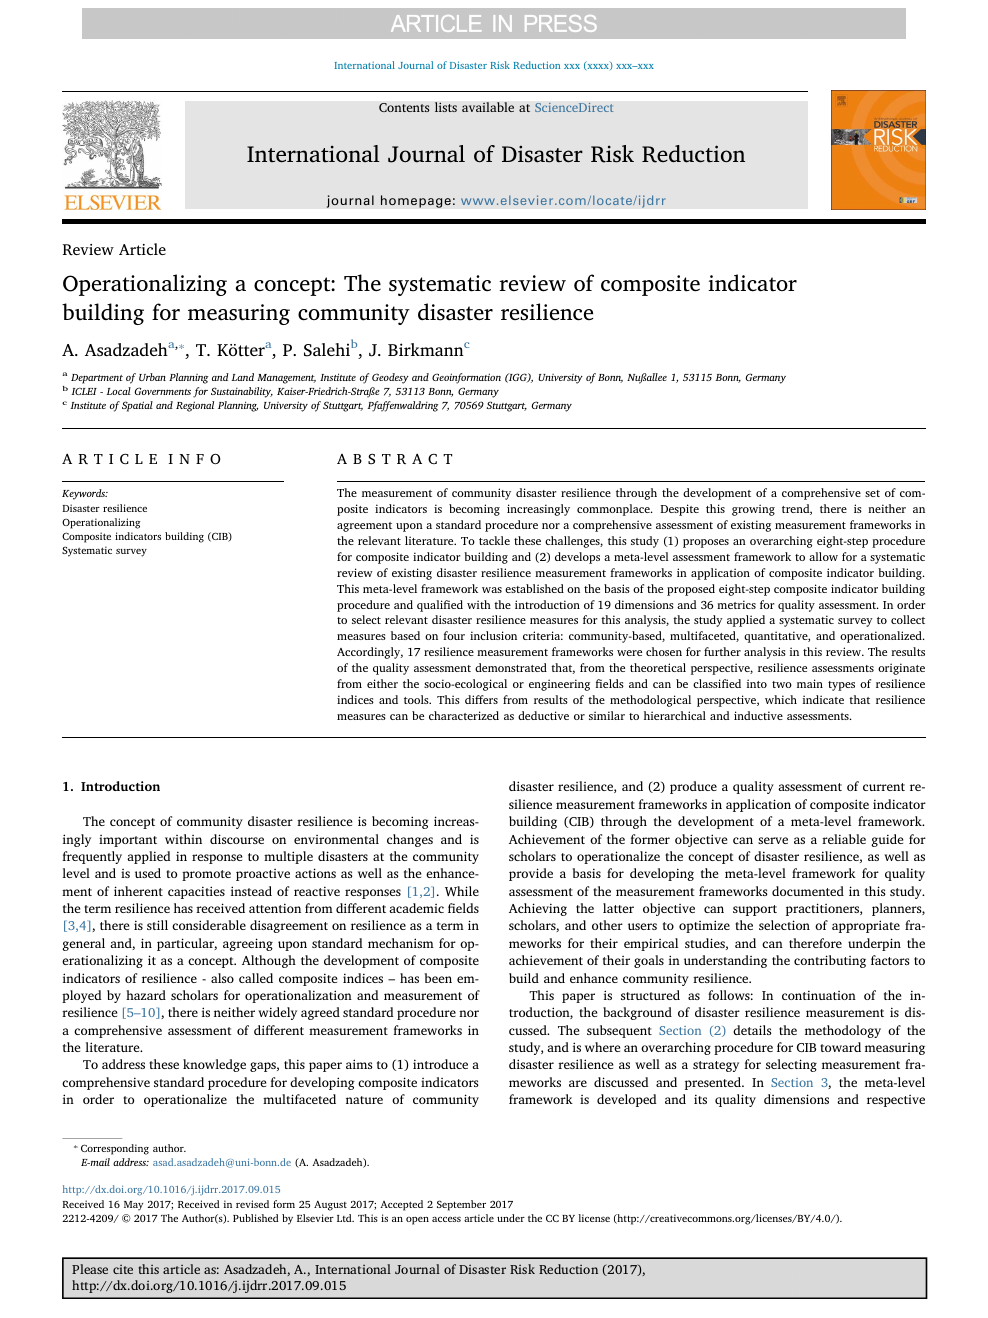 Operationalizing a concept: The systematic review of composite indicator  building for measuring community disaster resilience – topic of research  paper in Economics and business. Download scholarly article PDF and read  for free